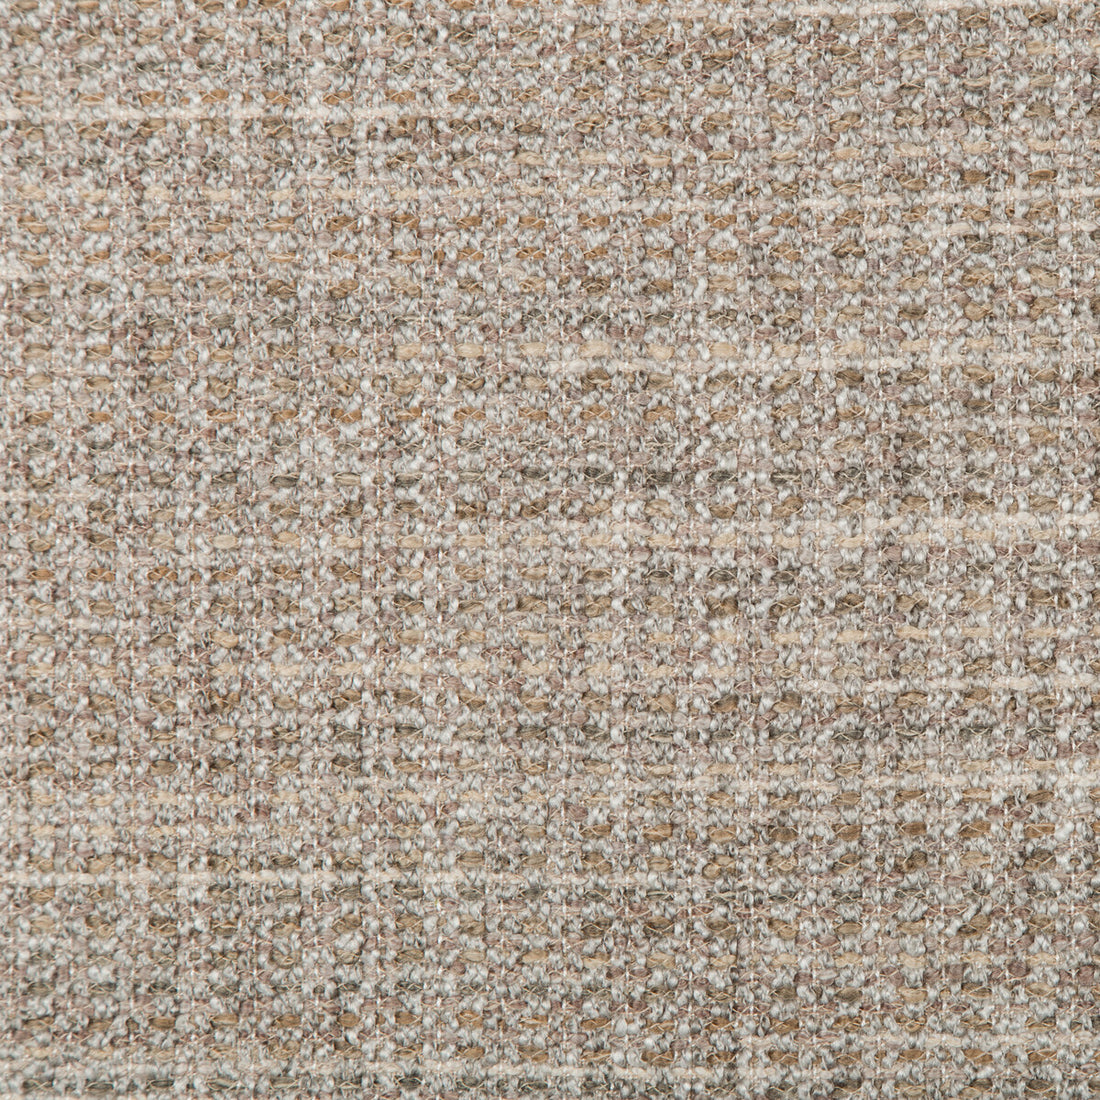 Sandibe Boucle fabric in cloud color - pattern 35511.611.0 - by Kravet Design in the Barclay Butera Sagamore collection